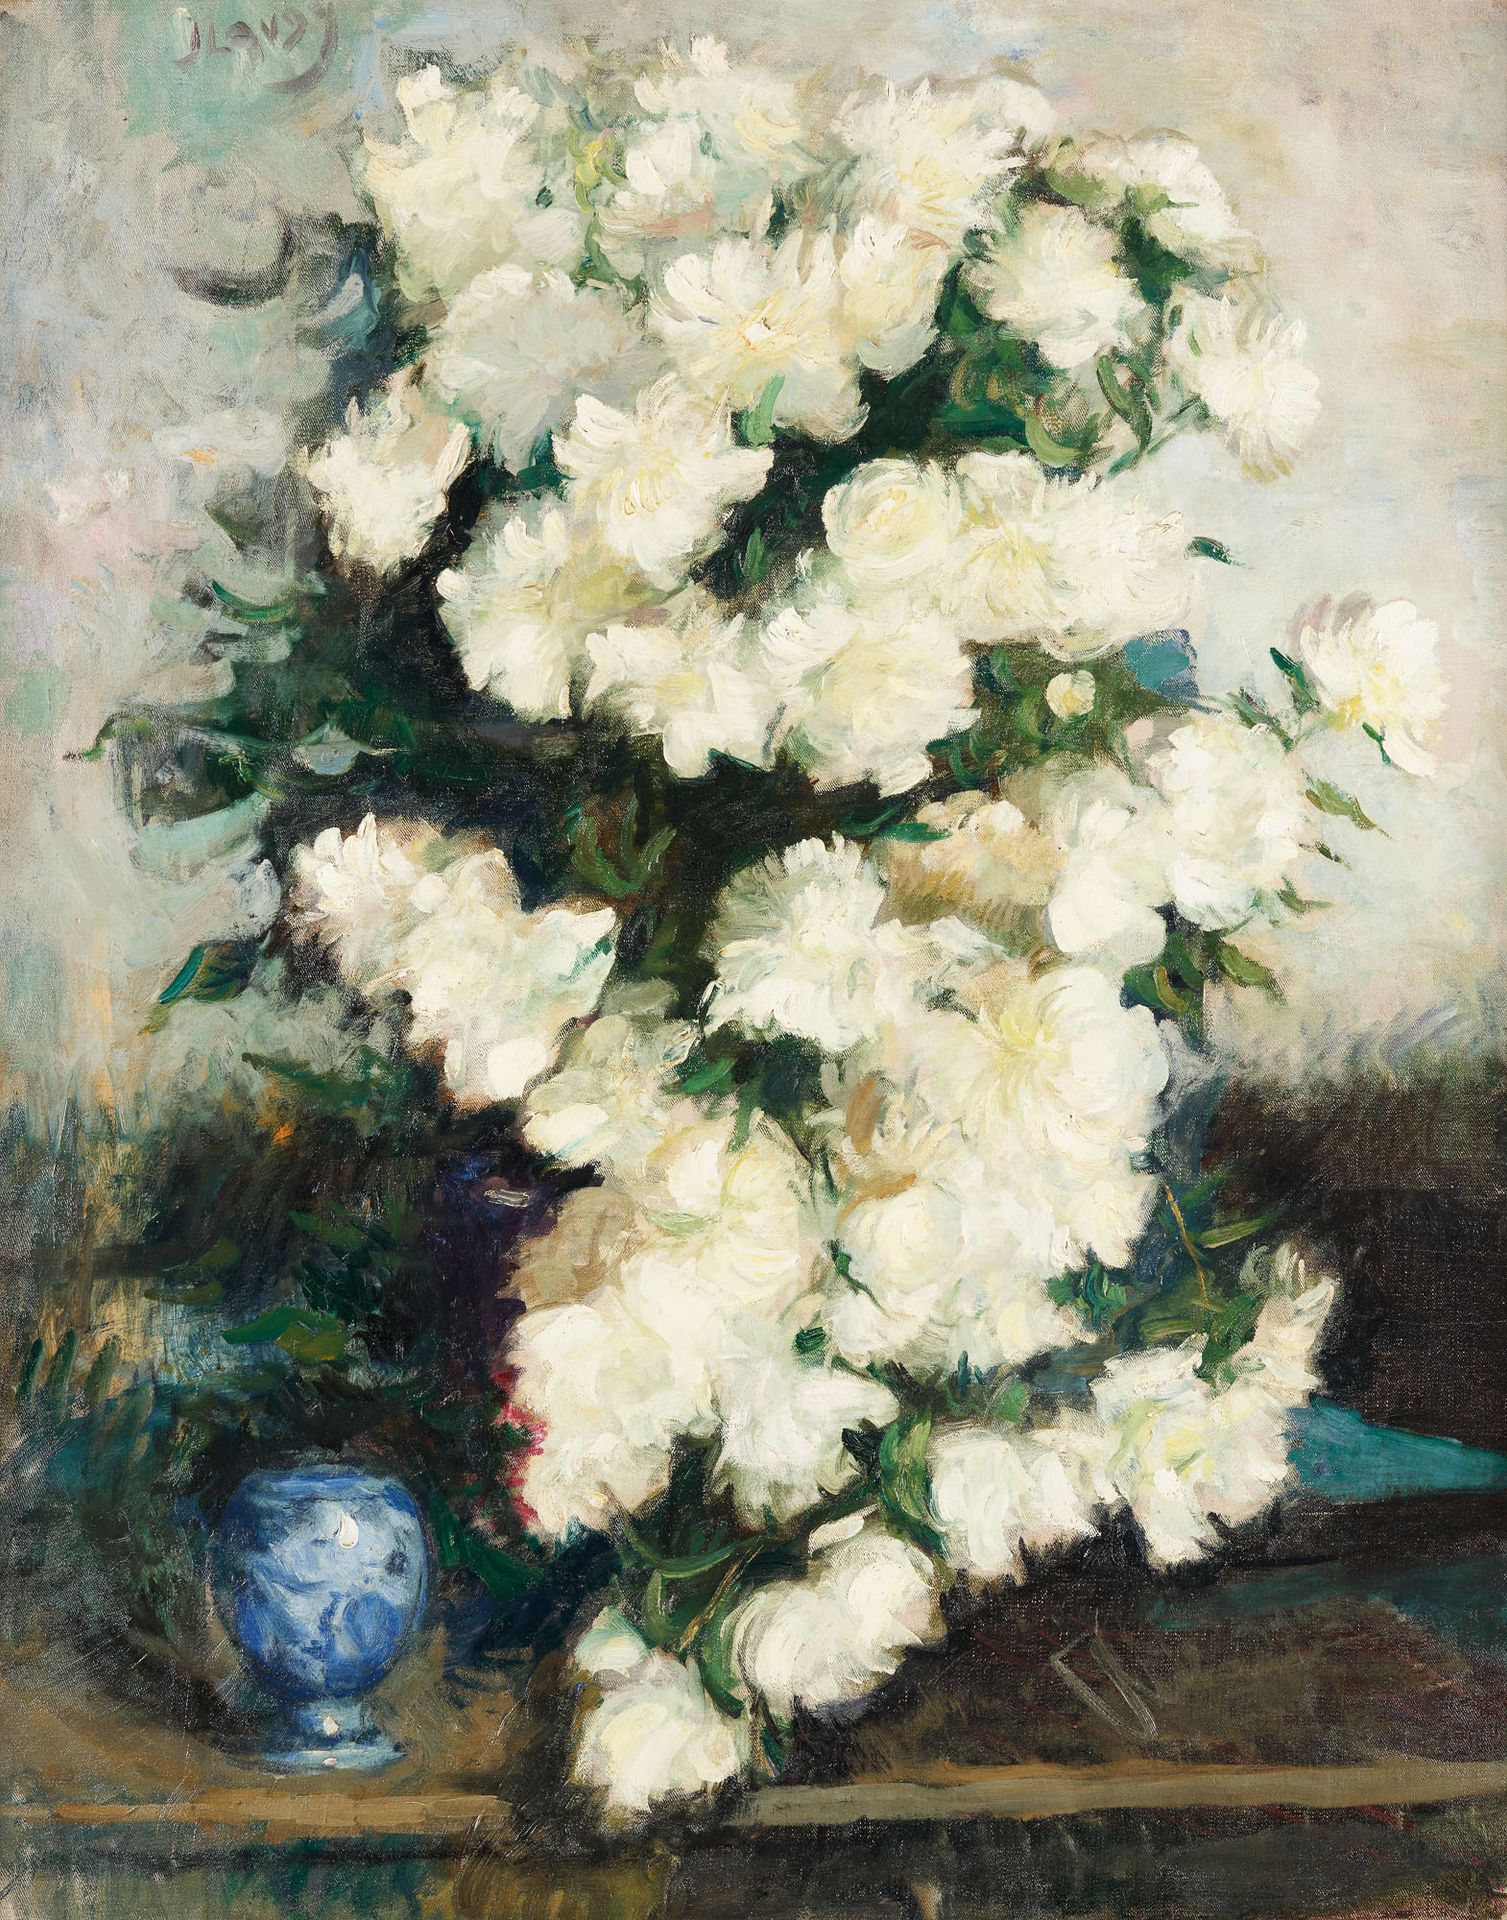 Jean LAUDY École belge (1877-1956) Oil on canvas: "The white flowers".

Signed: &hellip;